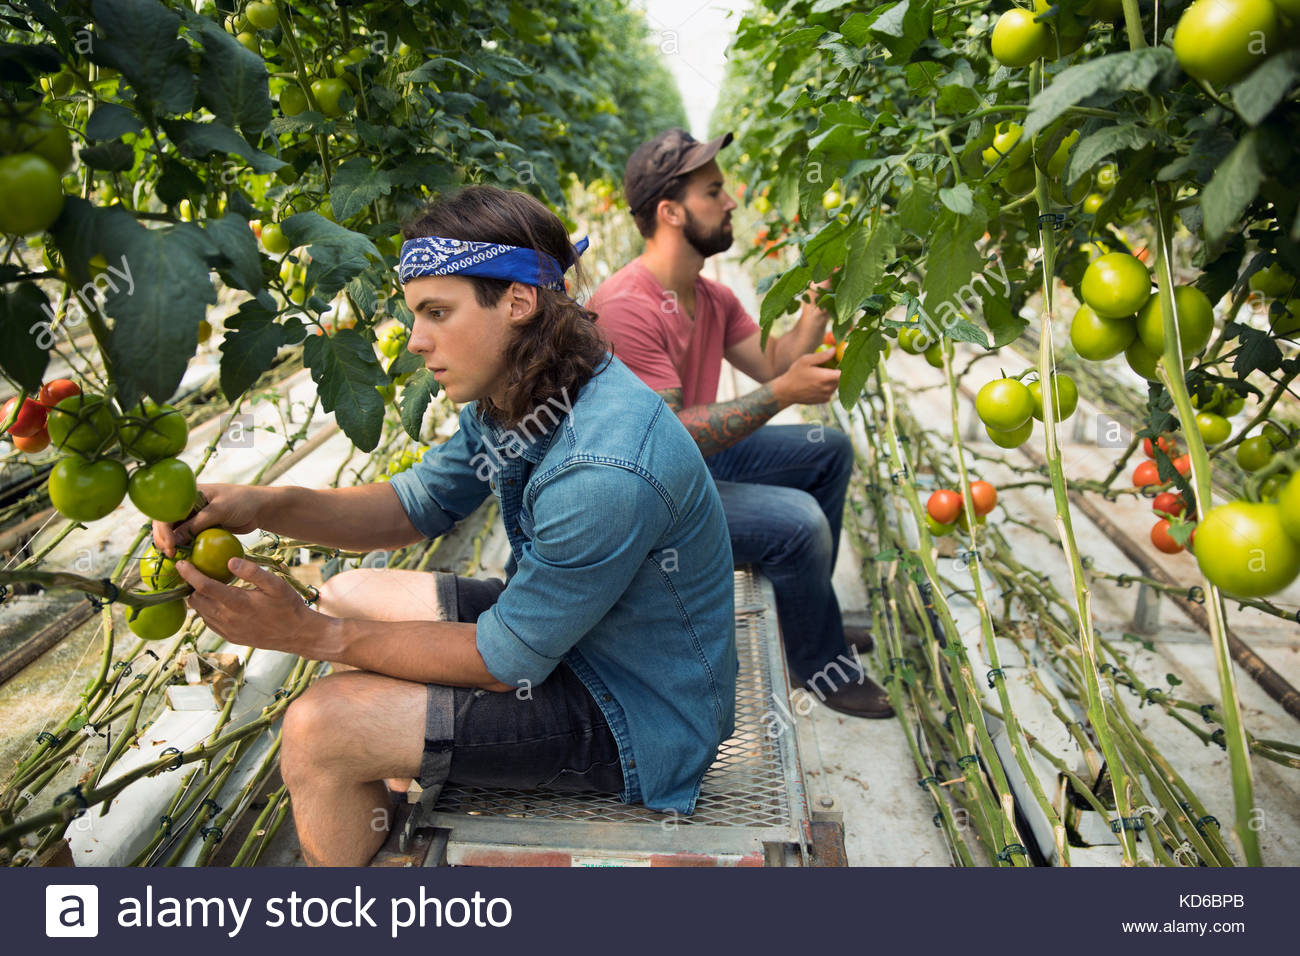 Men checking, pruning tomato plants growing on tomato plant vines in greenhouse Stock Photo